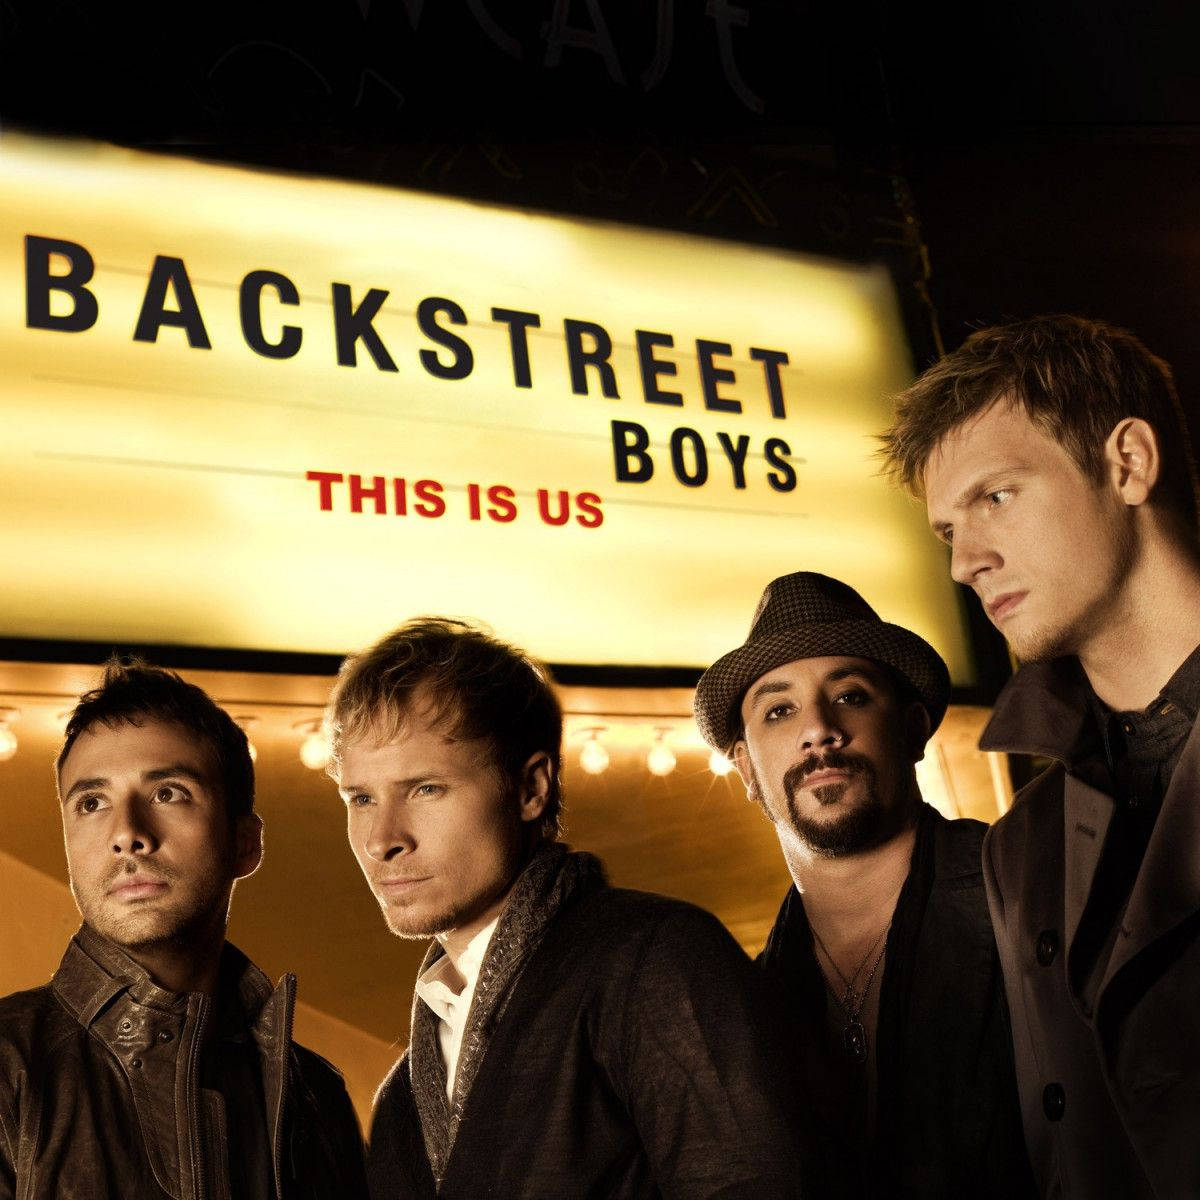 Image Backstreet Boys This Is Us Poster Background